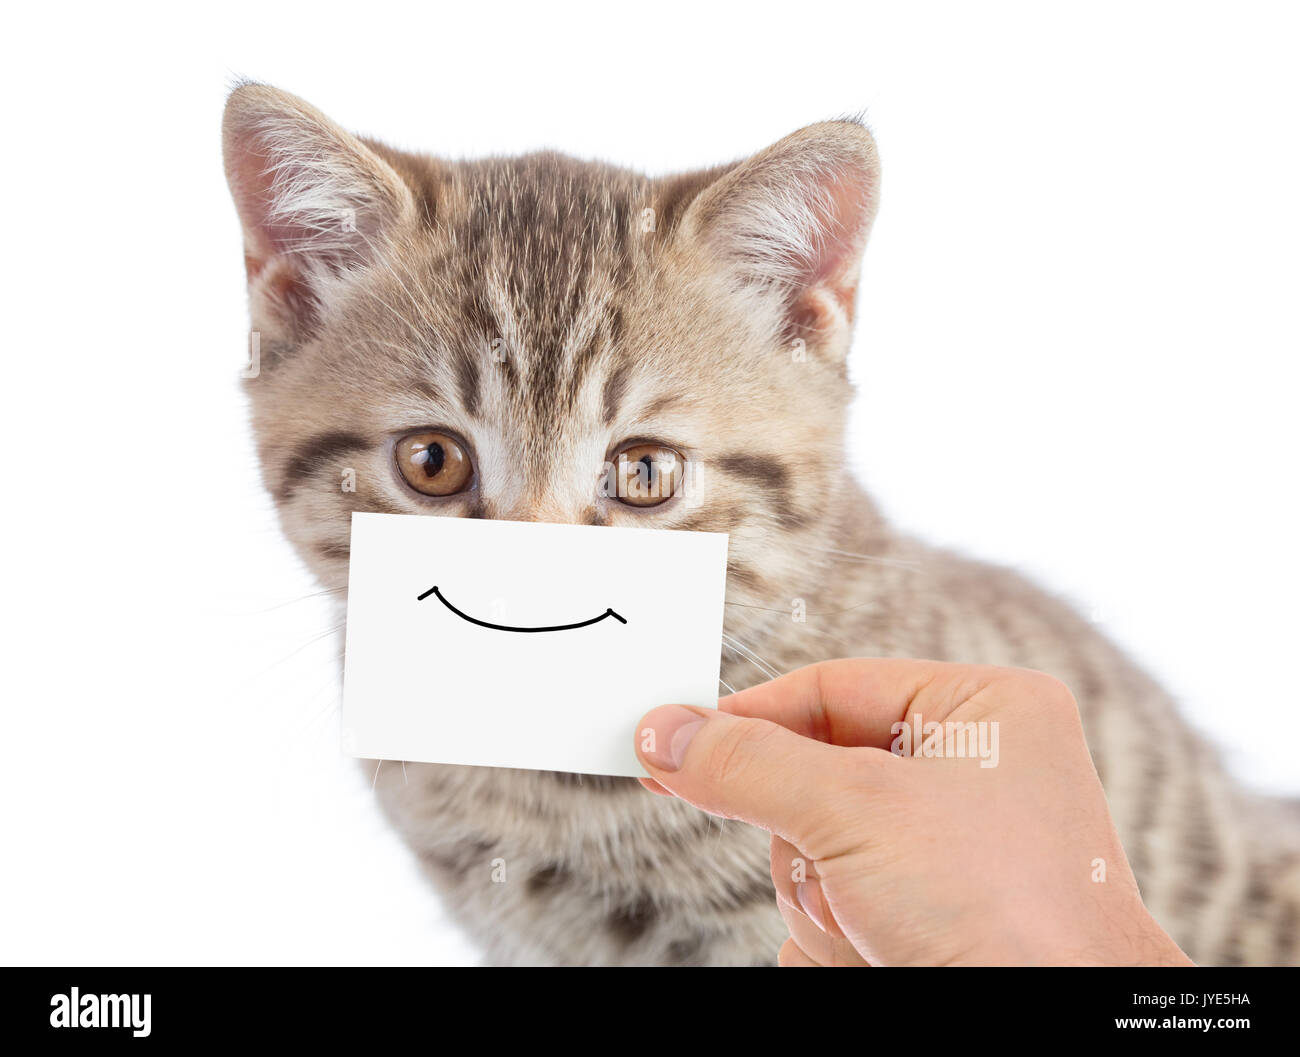 funny cat portrait with smiling face Stock Photo - Alamy